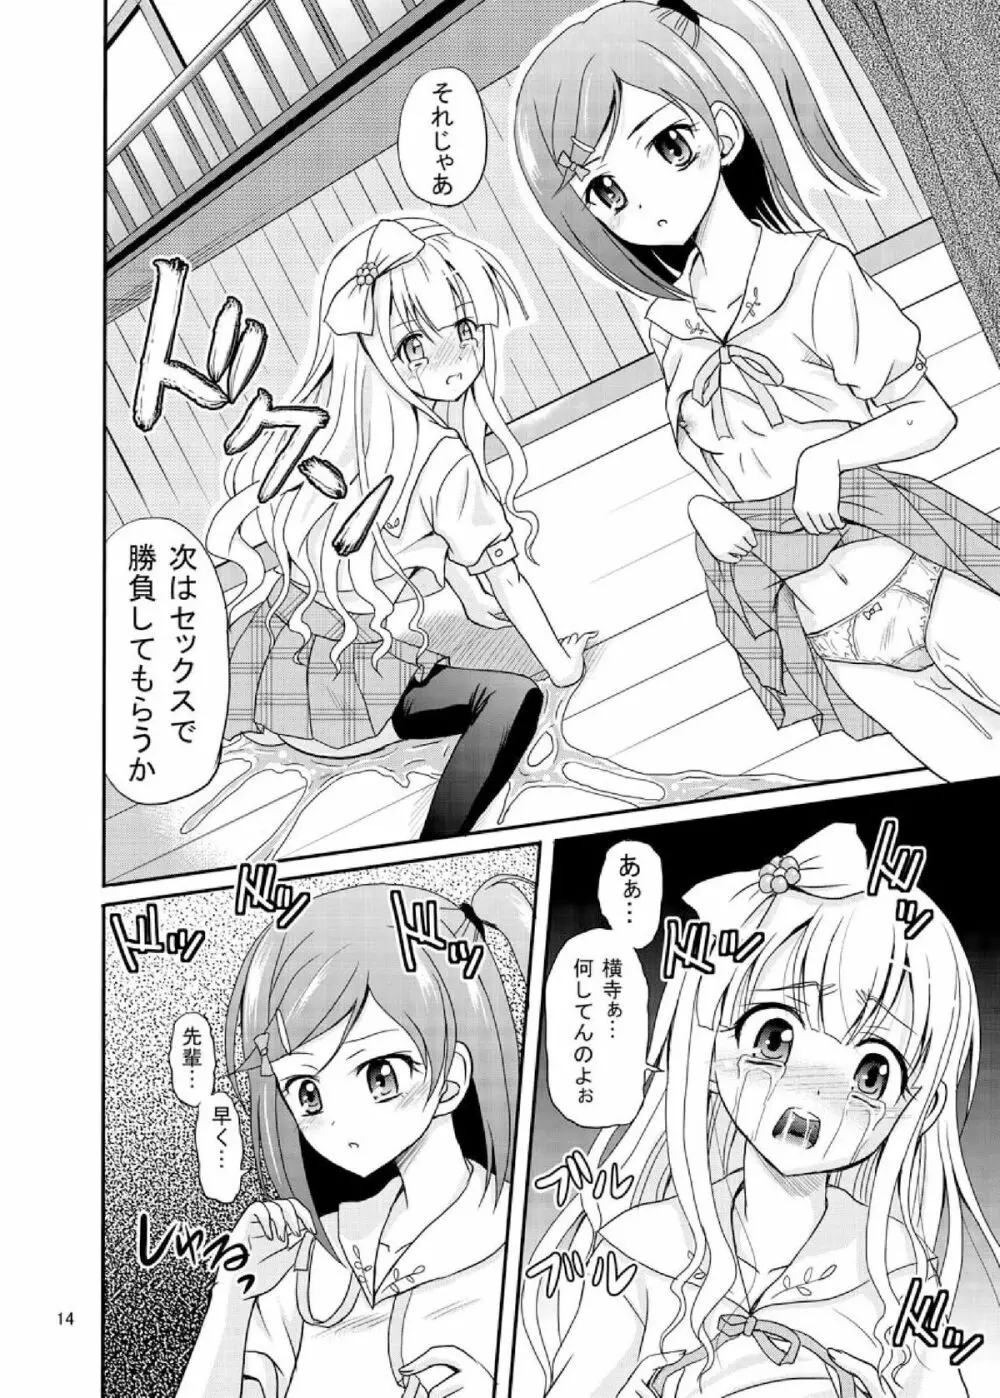 ARCANUMS 20 配信はじめました - page14